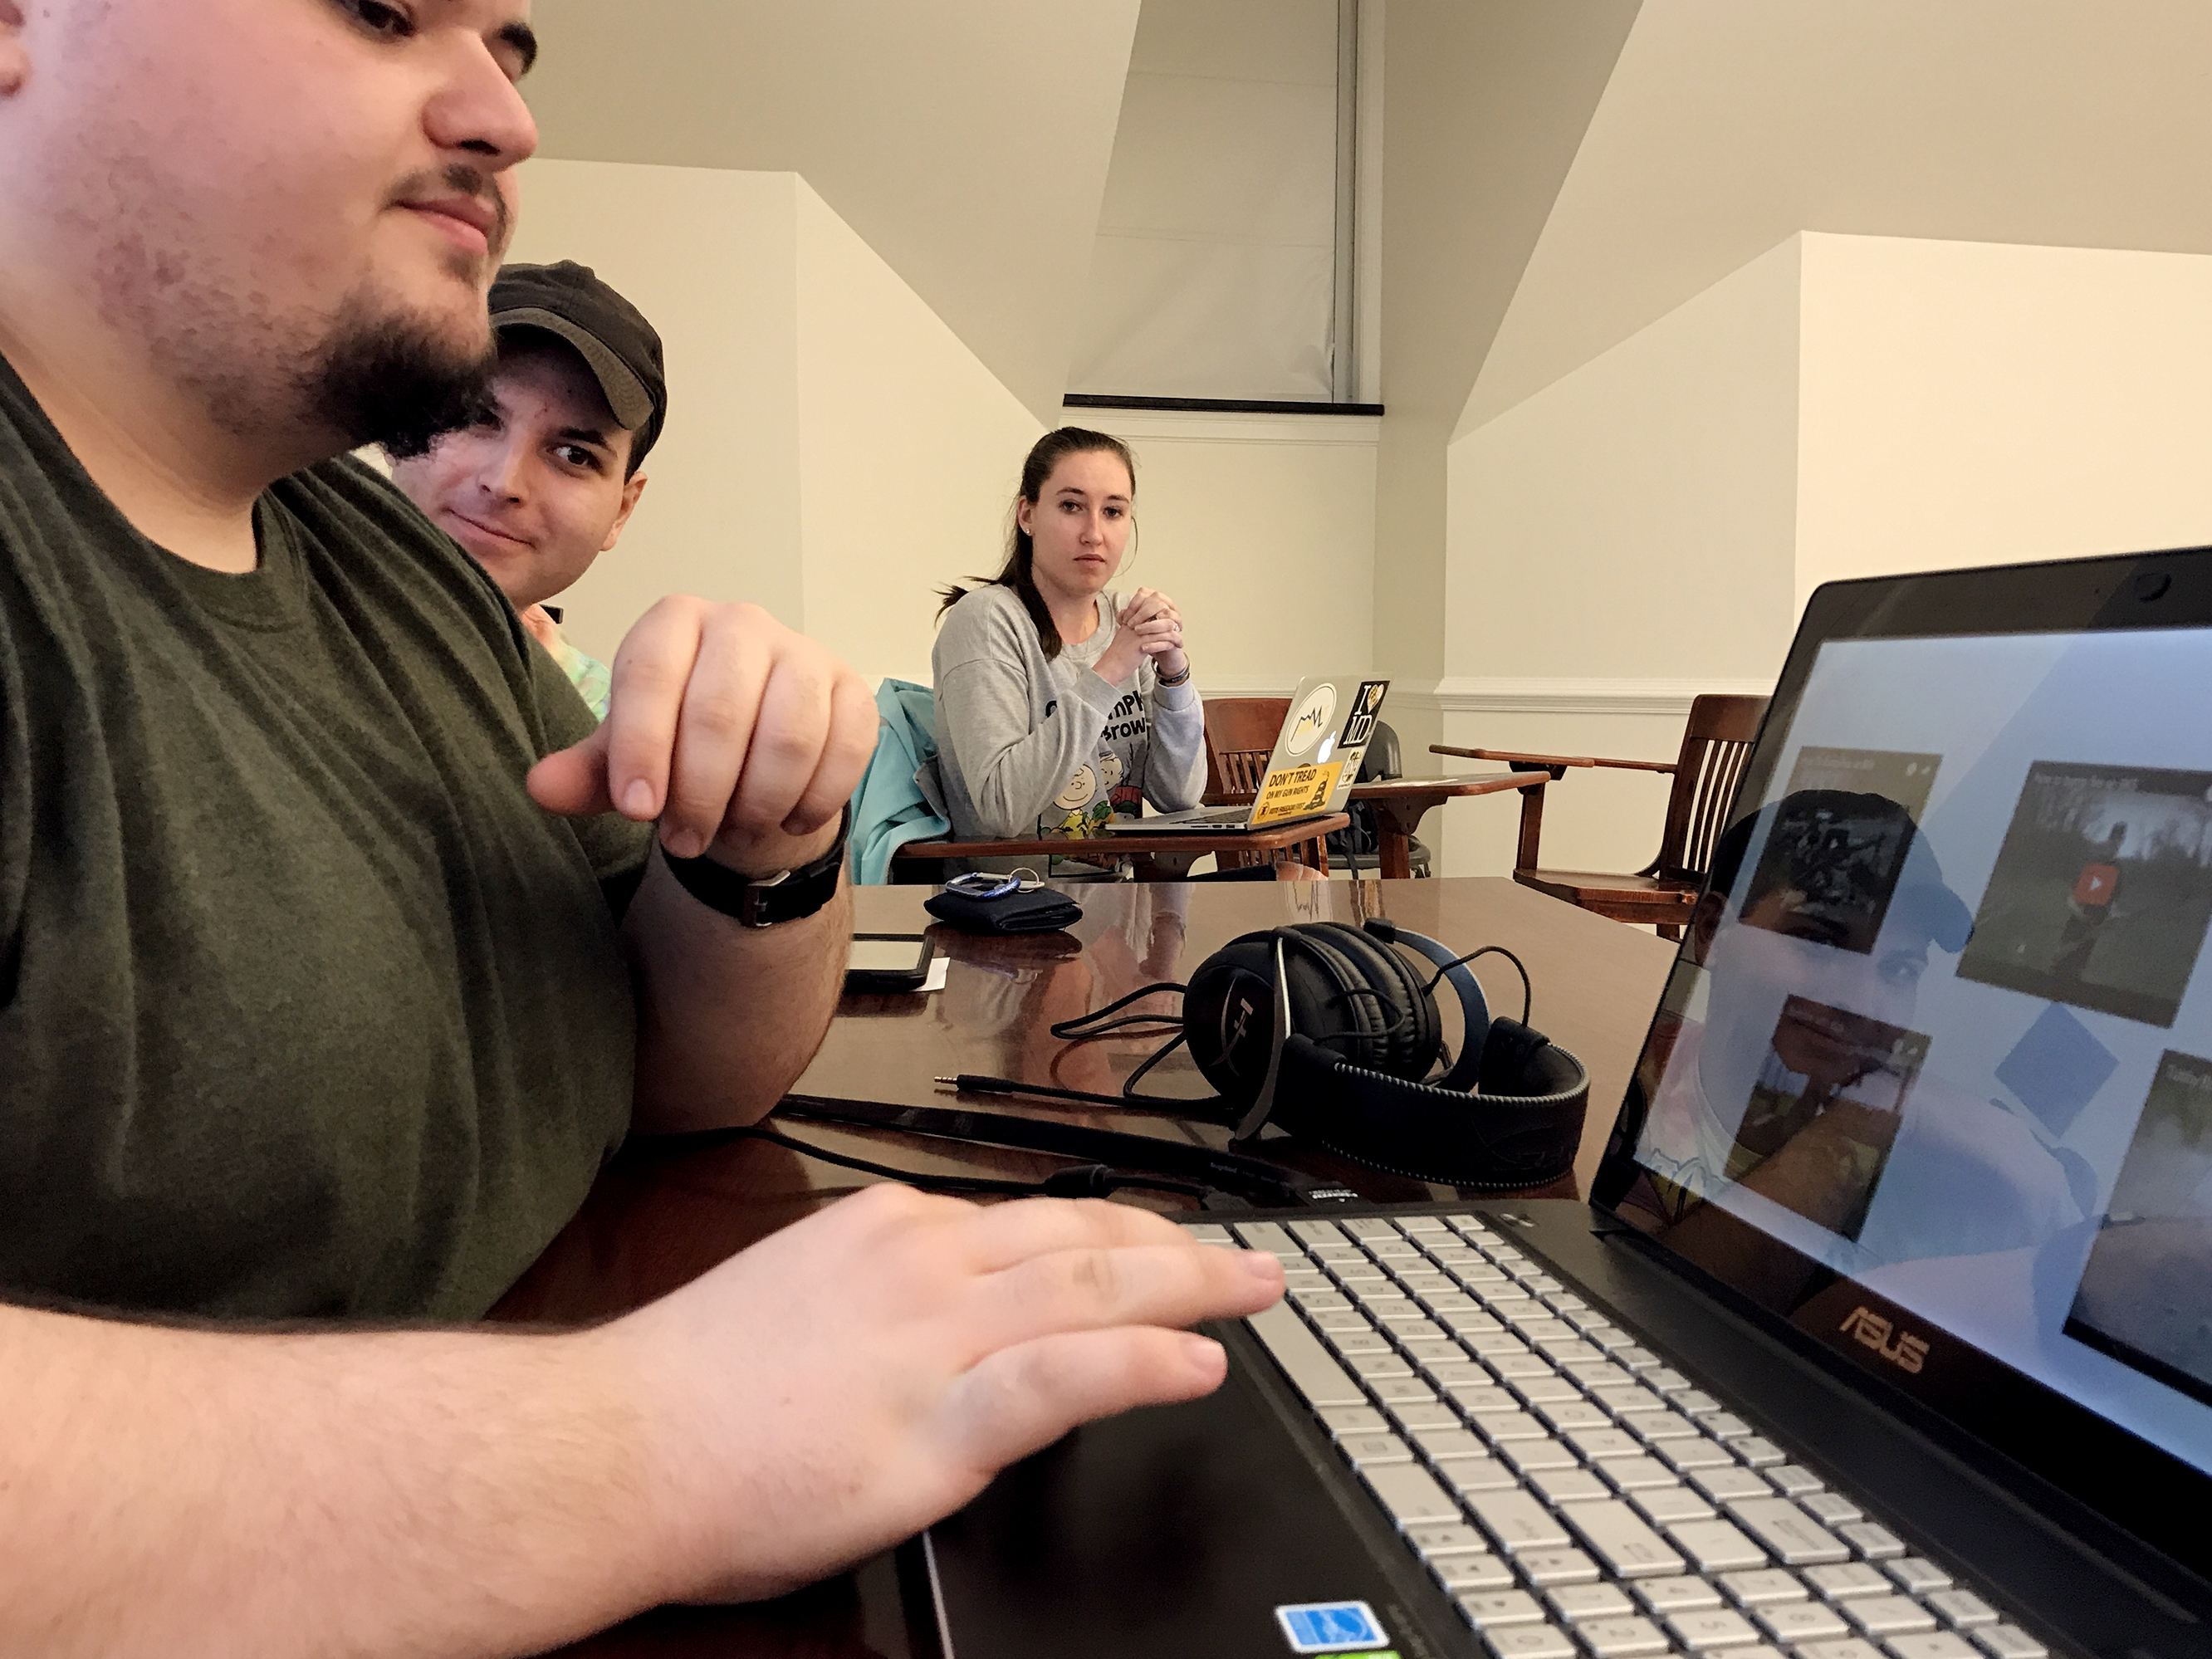 Kyle Schmitt (from left), Owen Uber and Jordan Riger watch videos of firearm demonstrations at a meeting of Students for the Second Amendment. According to its website, the student group wants to "erase the negativity associated with firearms" at the University of Delaware. (Photo by Hansi Lo Wang/NPR)